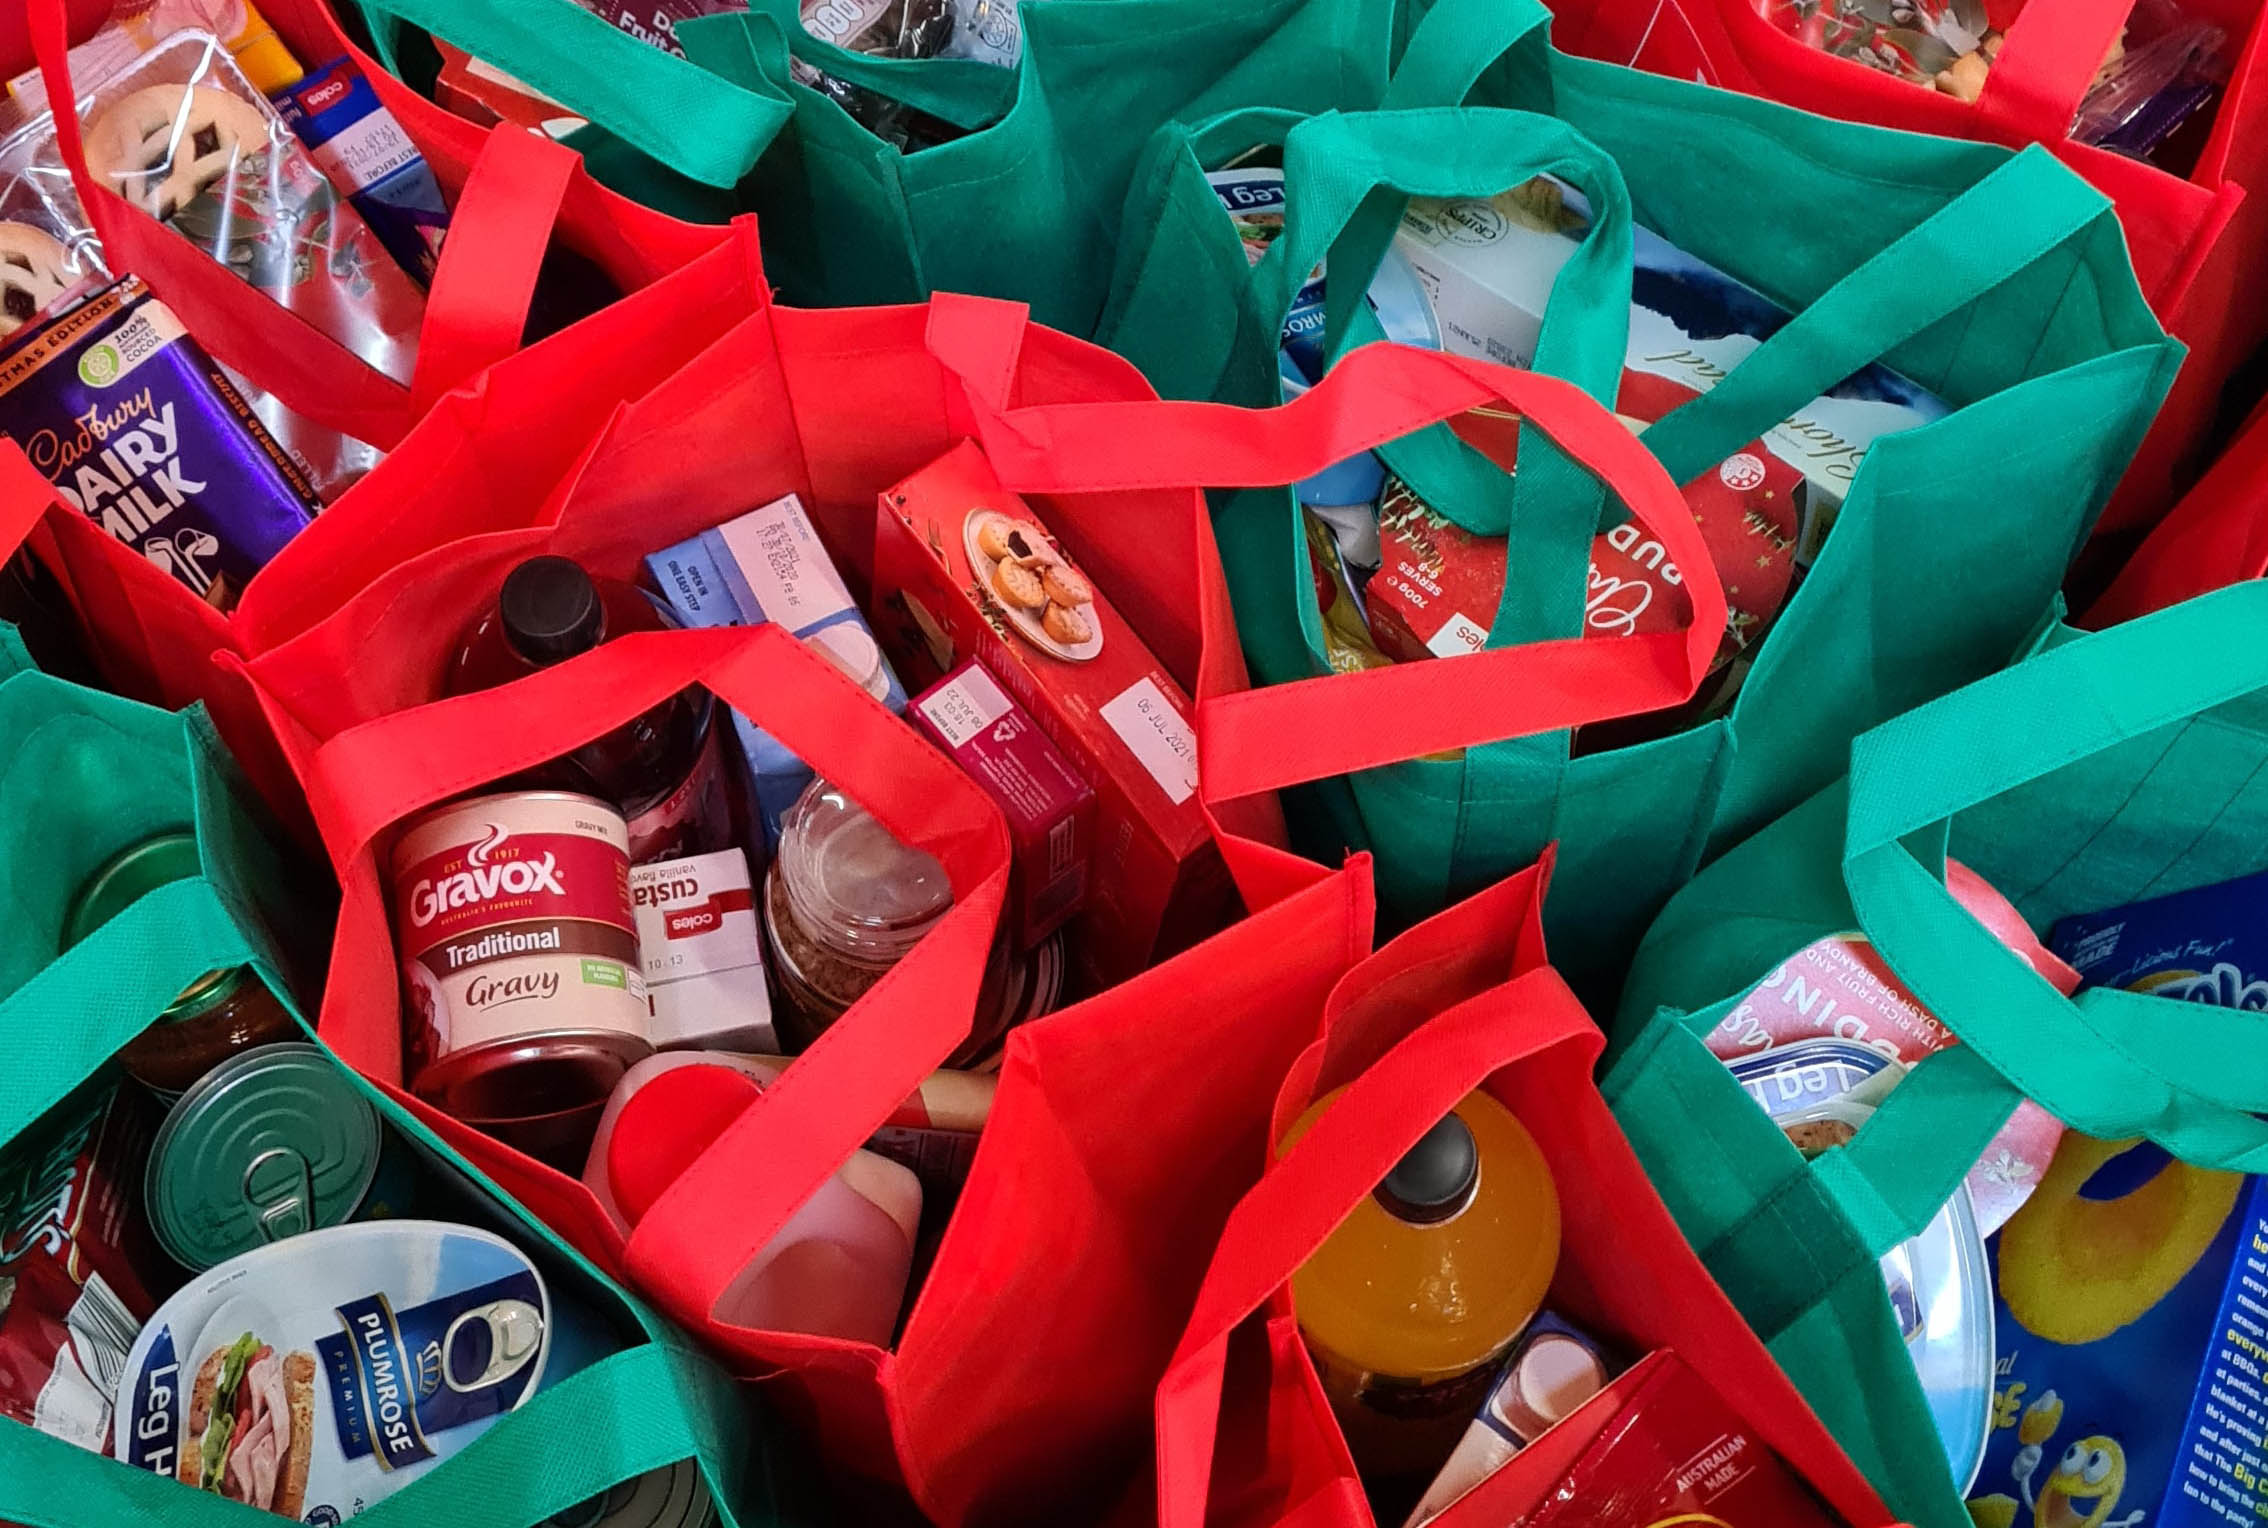 Red & Green bags full of canned goods and boxed items